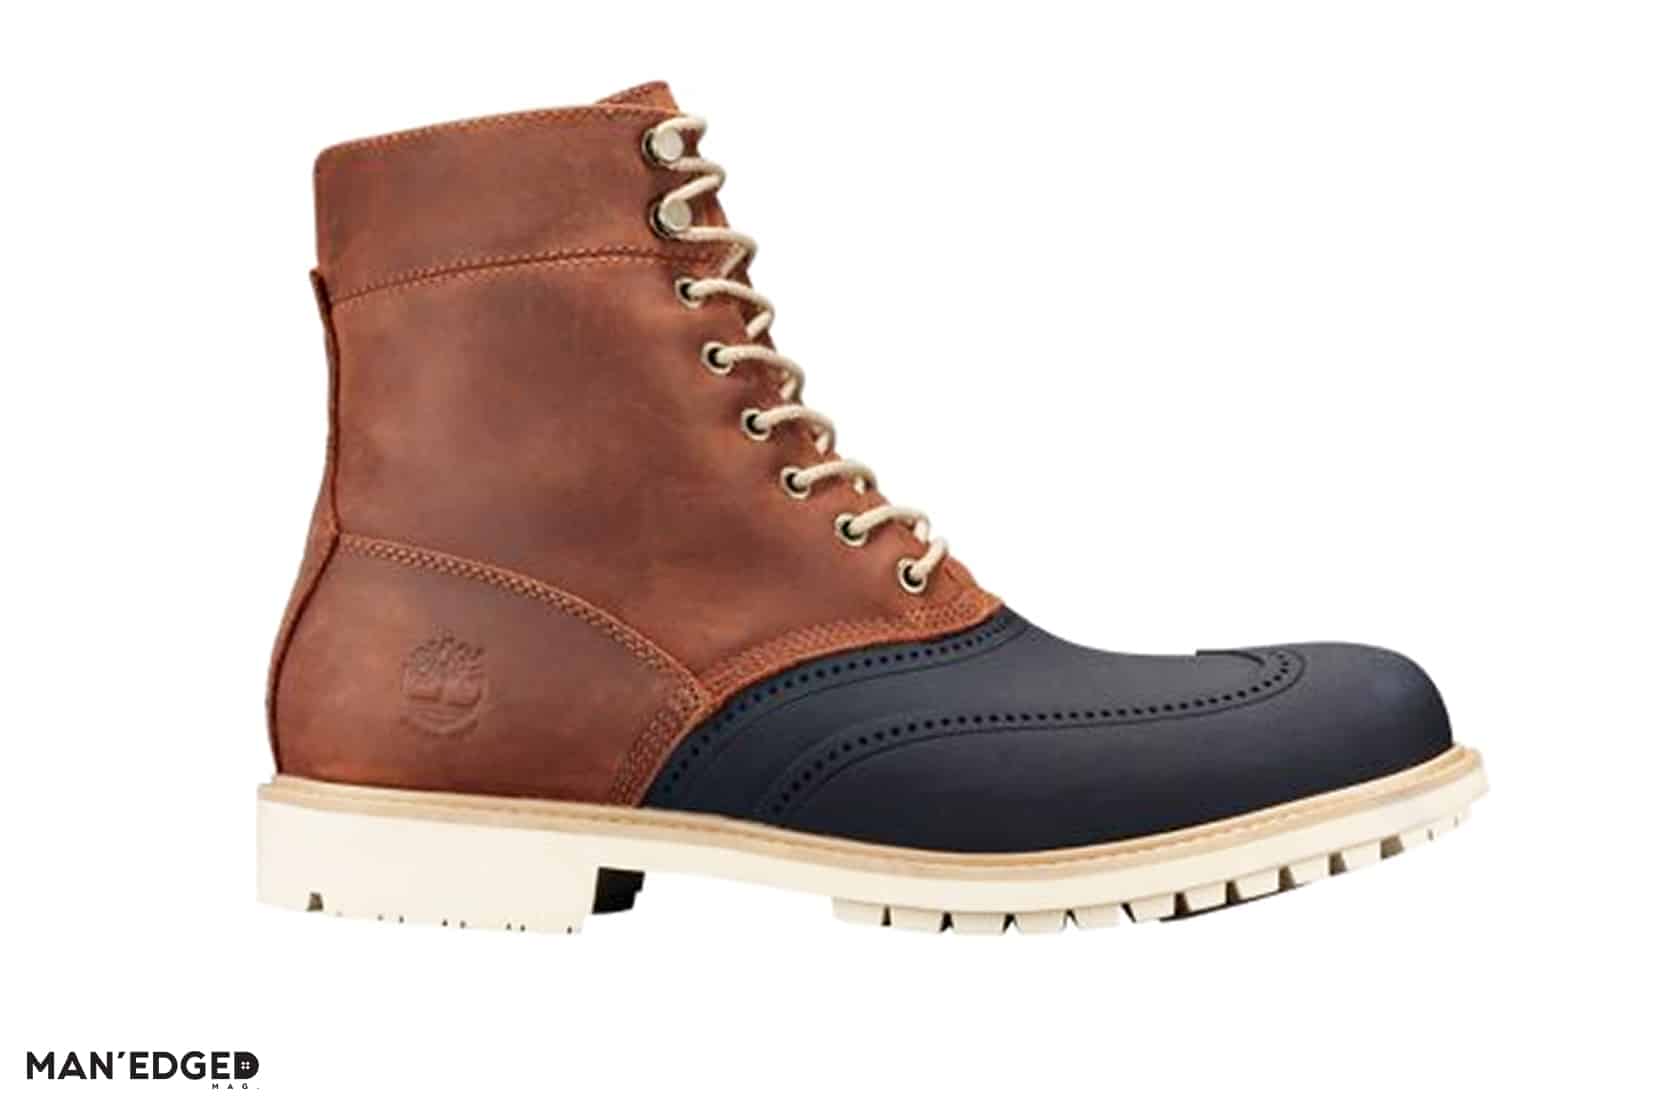 The Outdoorsman Gift Guide featuring Timberland Stormbuck Men's Boots